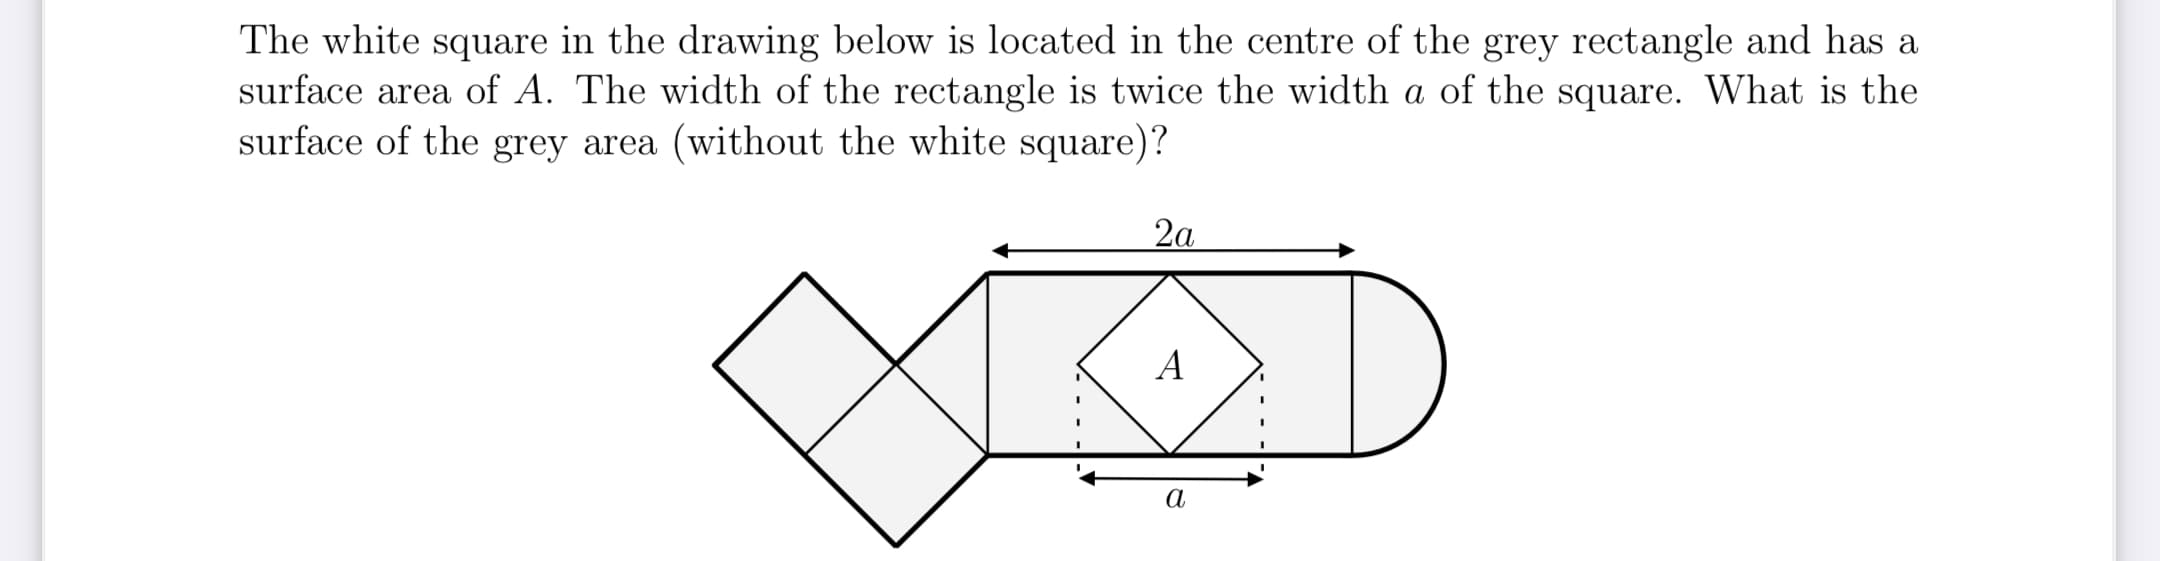 The white square in the drawing below is located in the centre of the grey rectangle and has a
surface area of A. The width of the rectangle is twice the width a of the square. What is the
surface of the grey area (without the white square)?
2а
А
а
